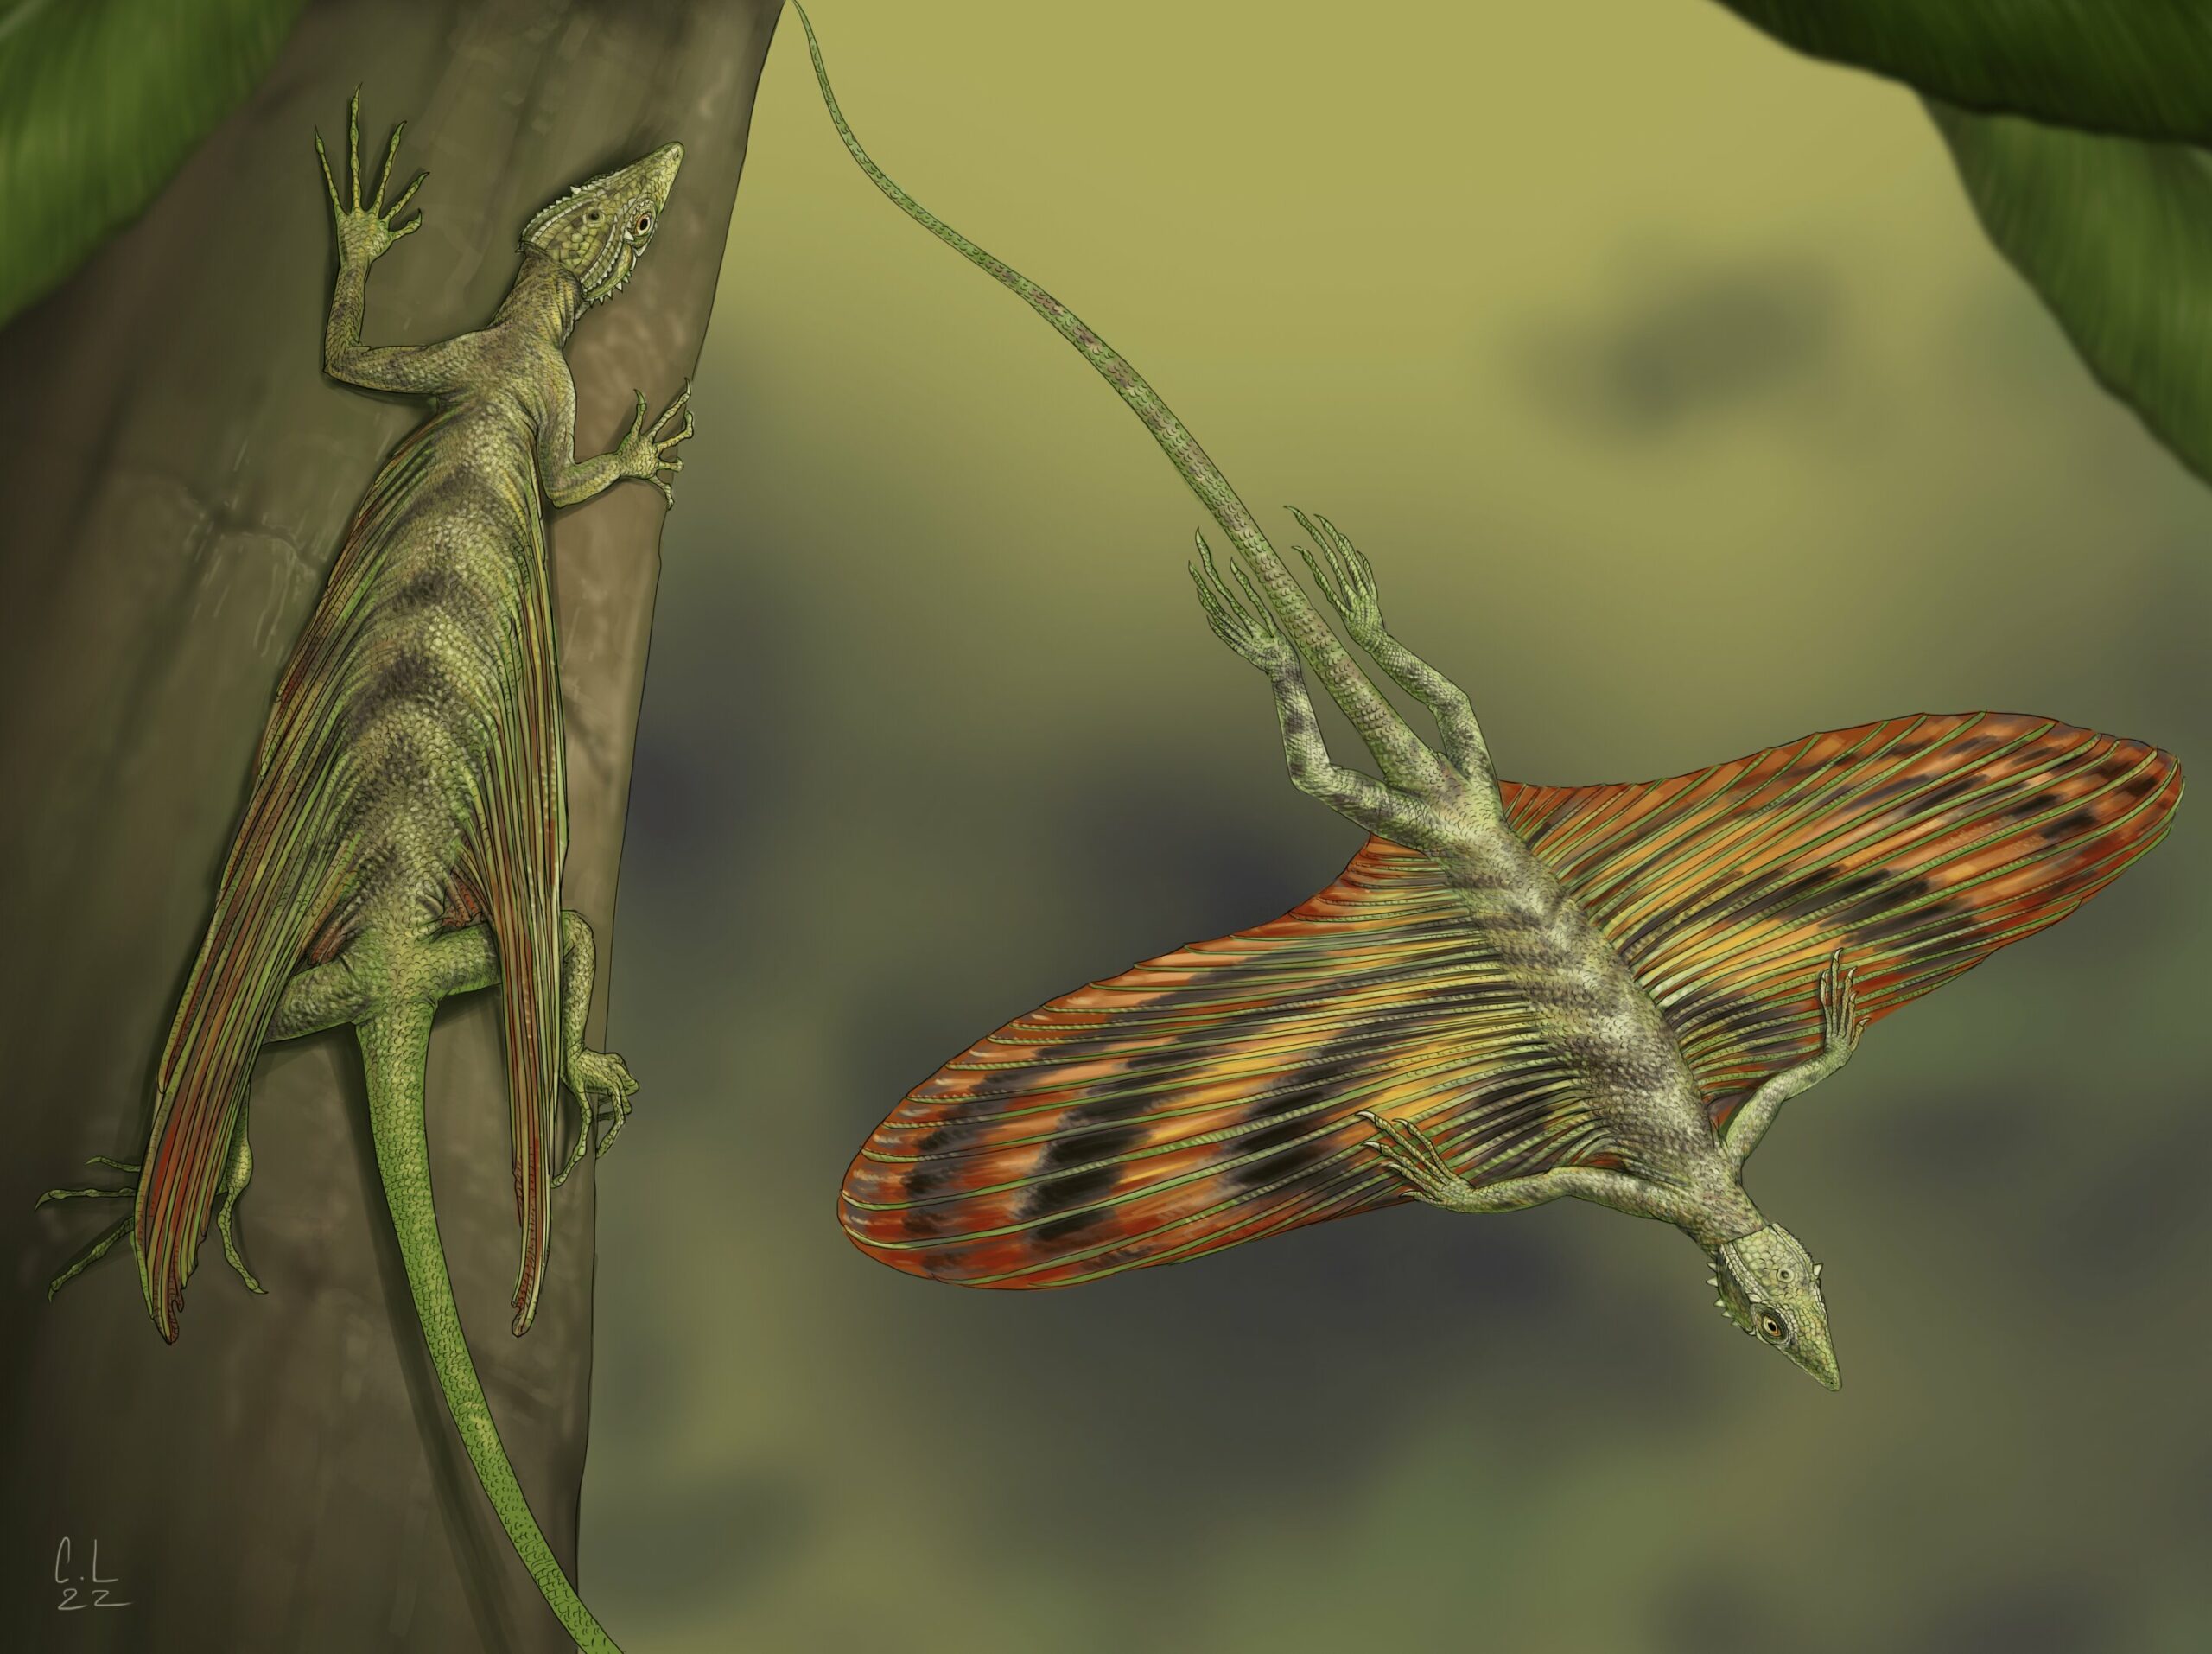 The world's first flying reptile was described.